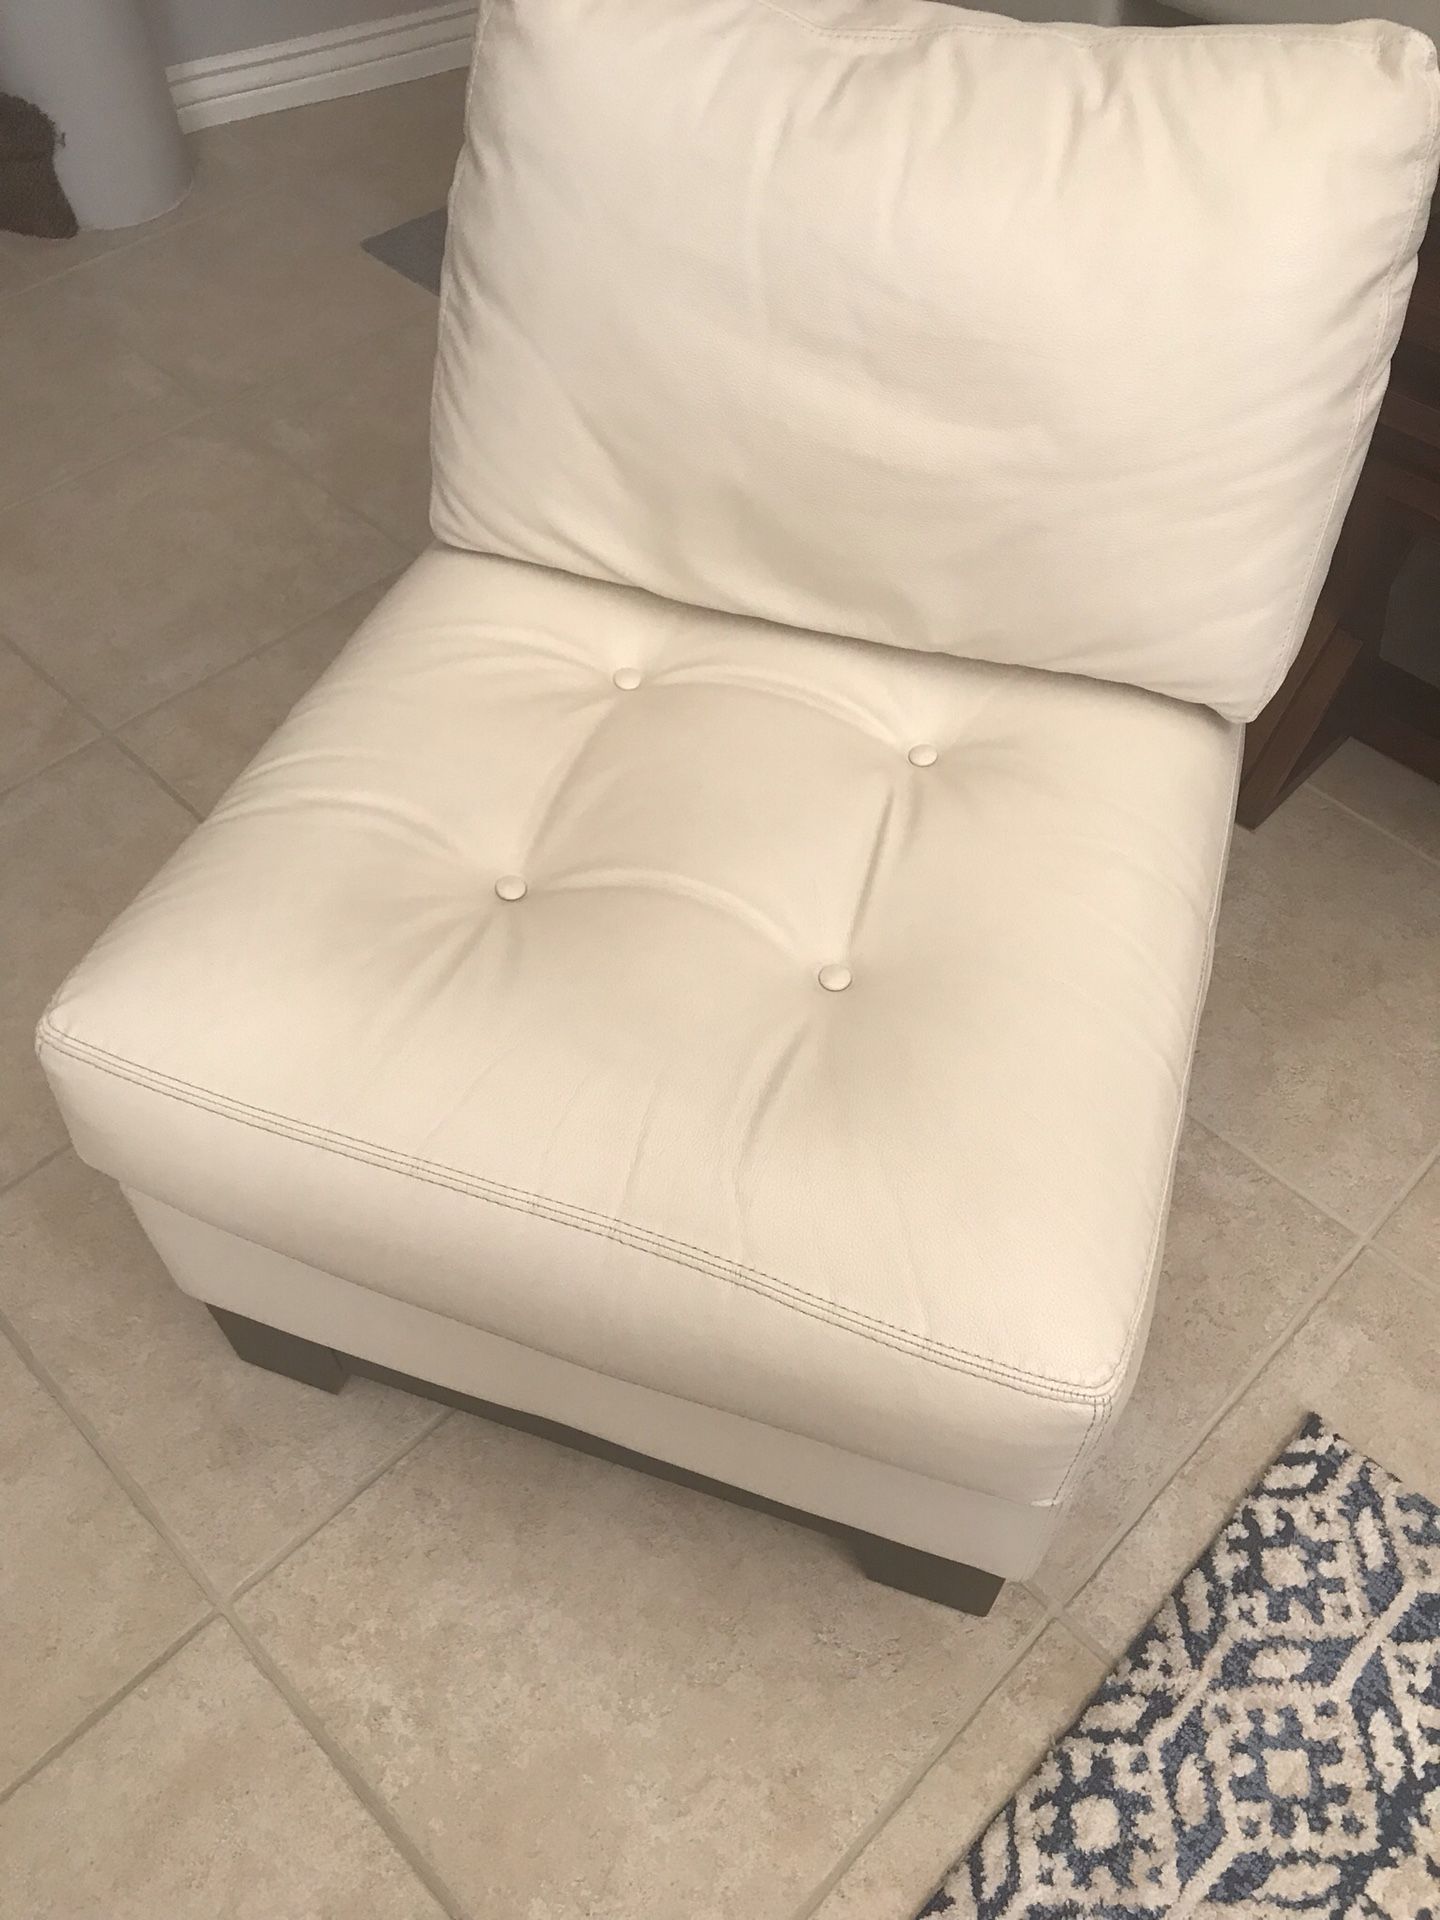 Leather chair. Excellent condition $65.00